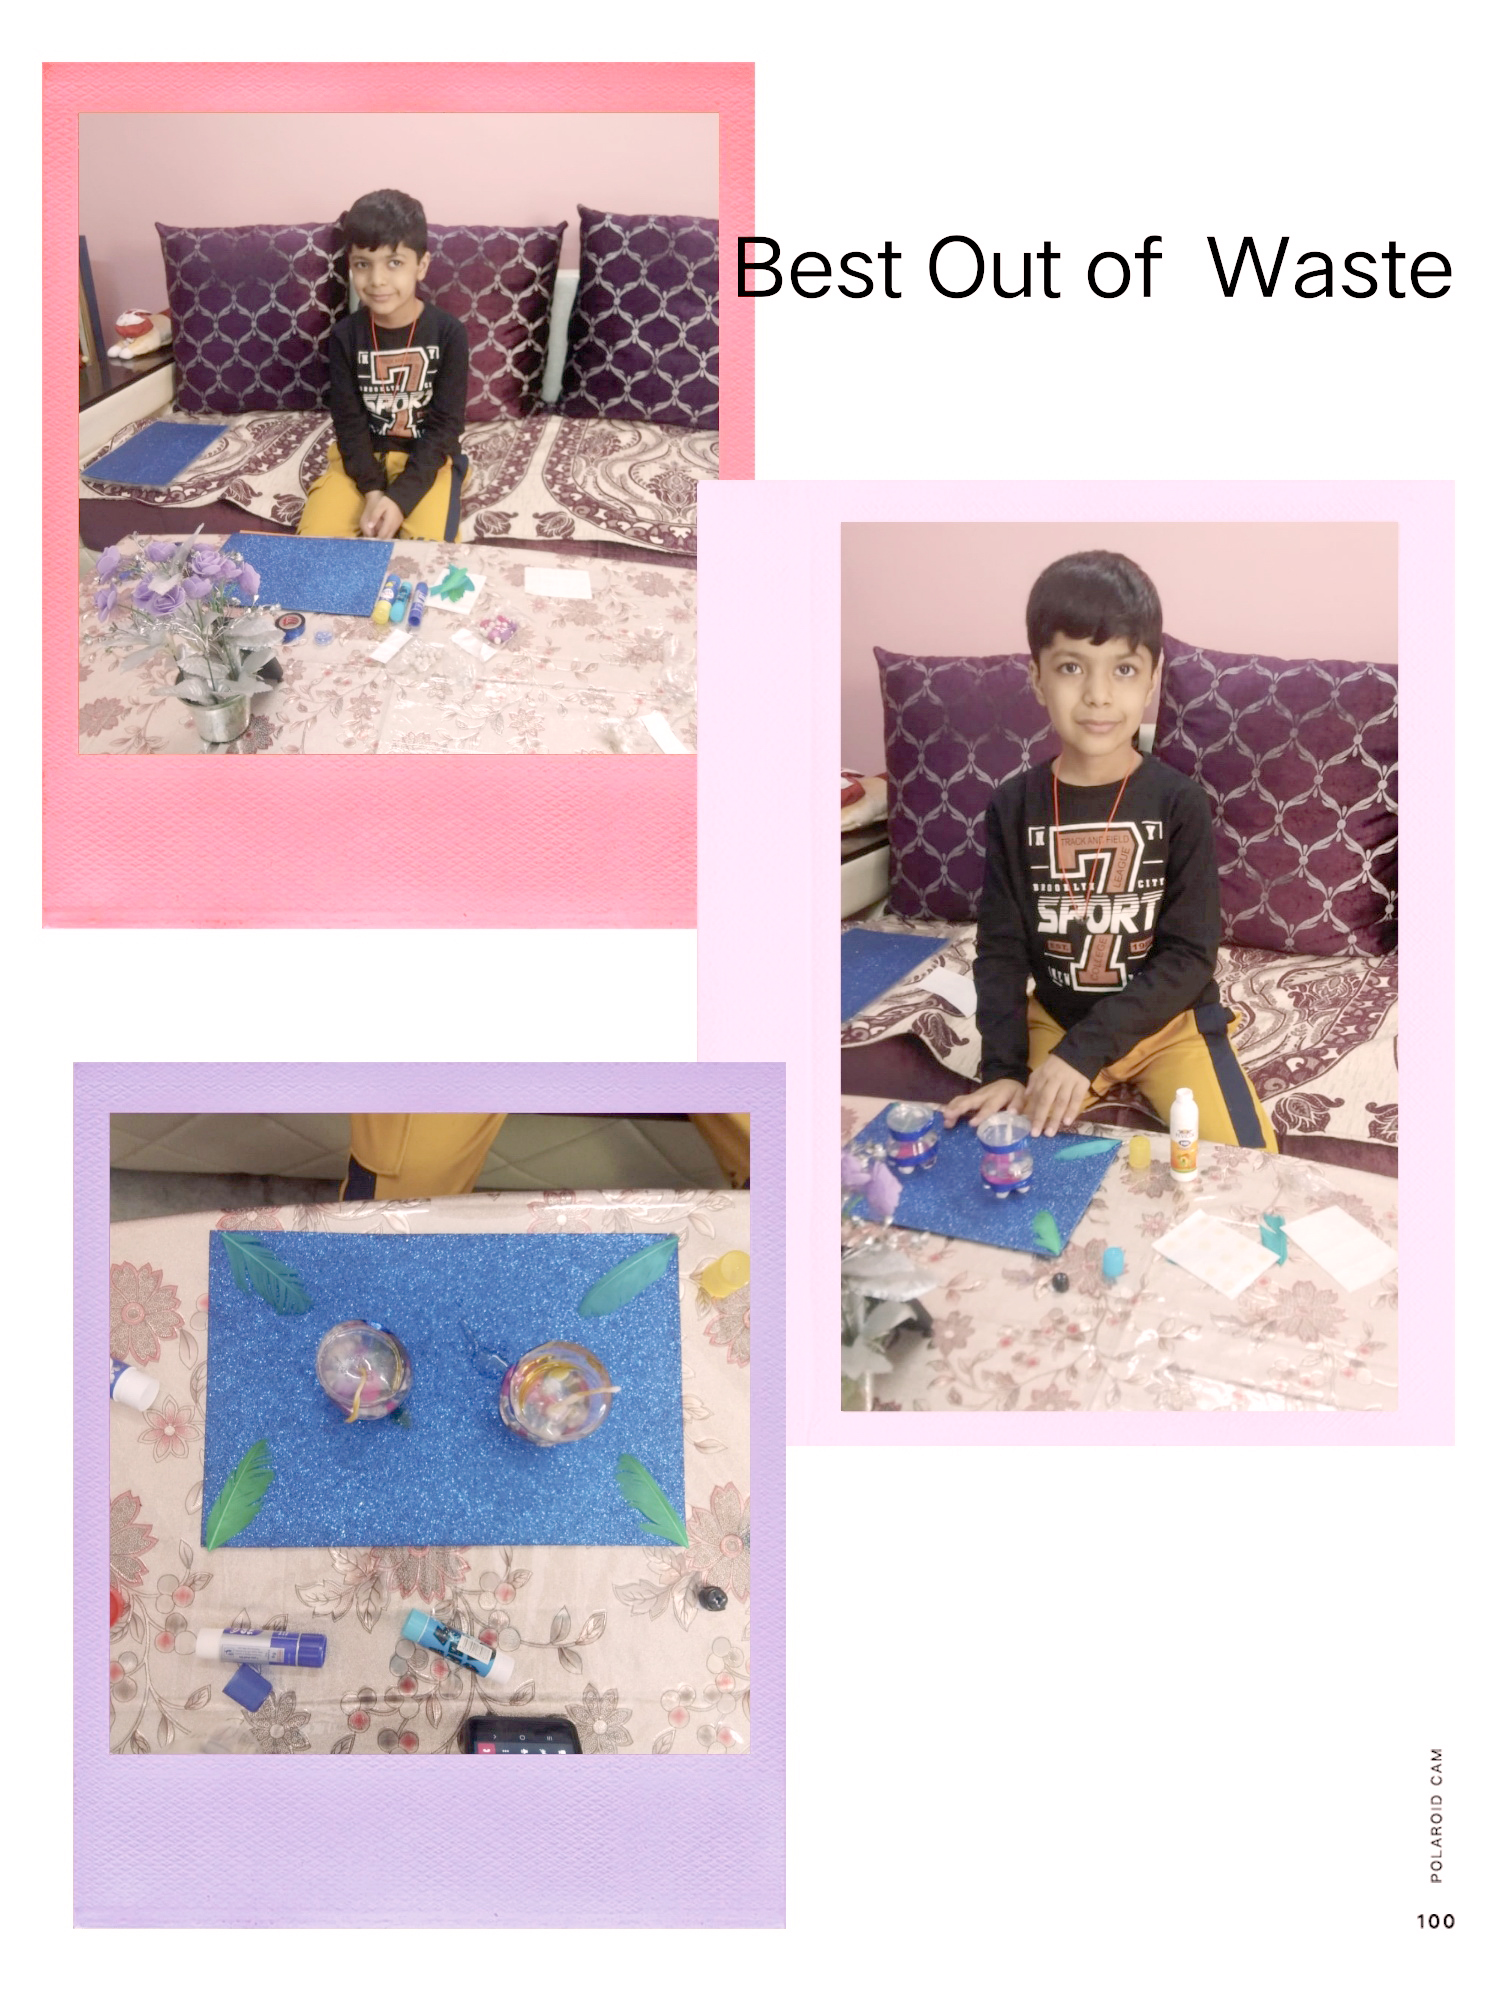 Presidium Pitampura, STUDENTS LEARN TO REUSE WITH THE BEST OUT OF WASTE ACTIVITY